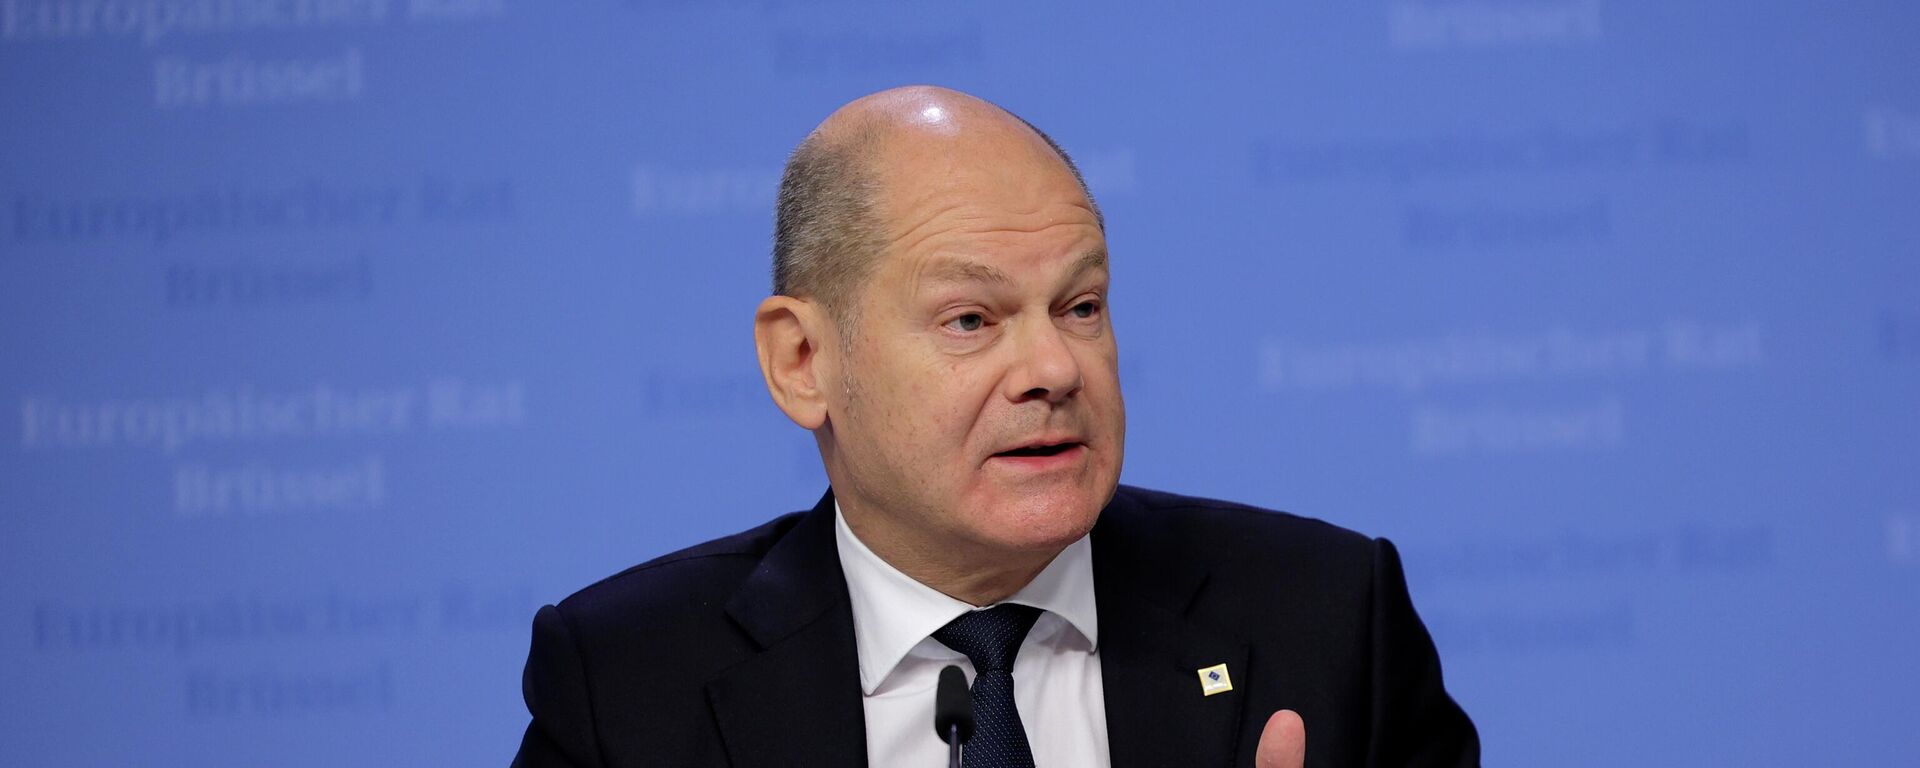 Germany's Chancellor Olaf Scholz speaks during a media conference at an EU summit in Brussels, Friday, Oct. 21, 2022 - Sputnik International, 1920, 26.06.2023